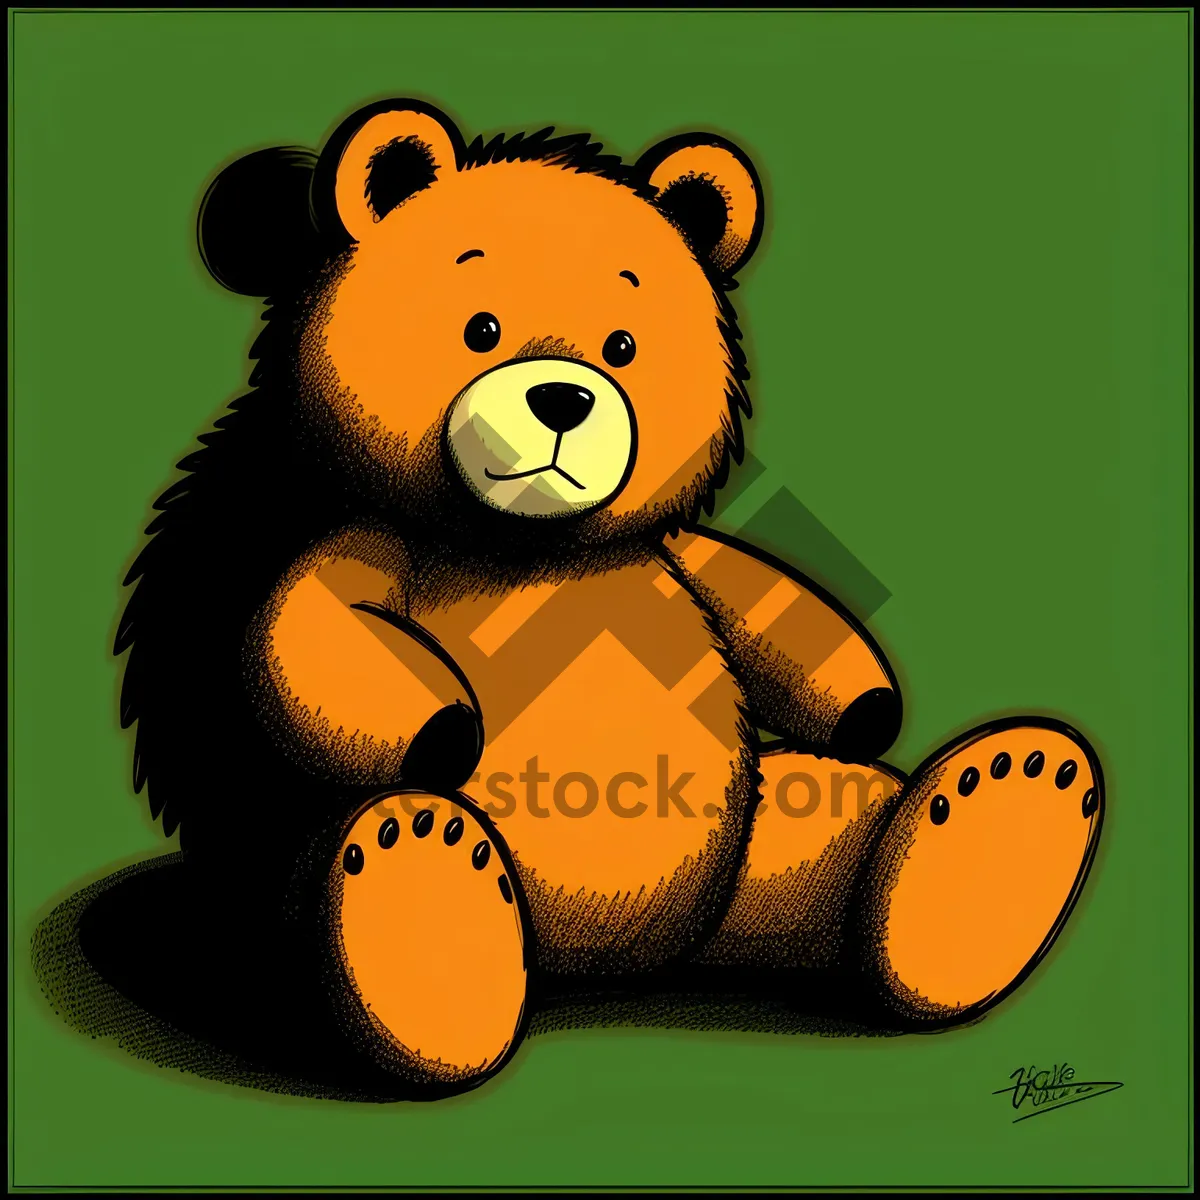 Picture of Fluffy Teddy Bear - Cute Childhood Toy